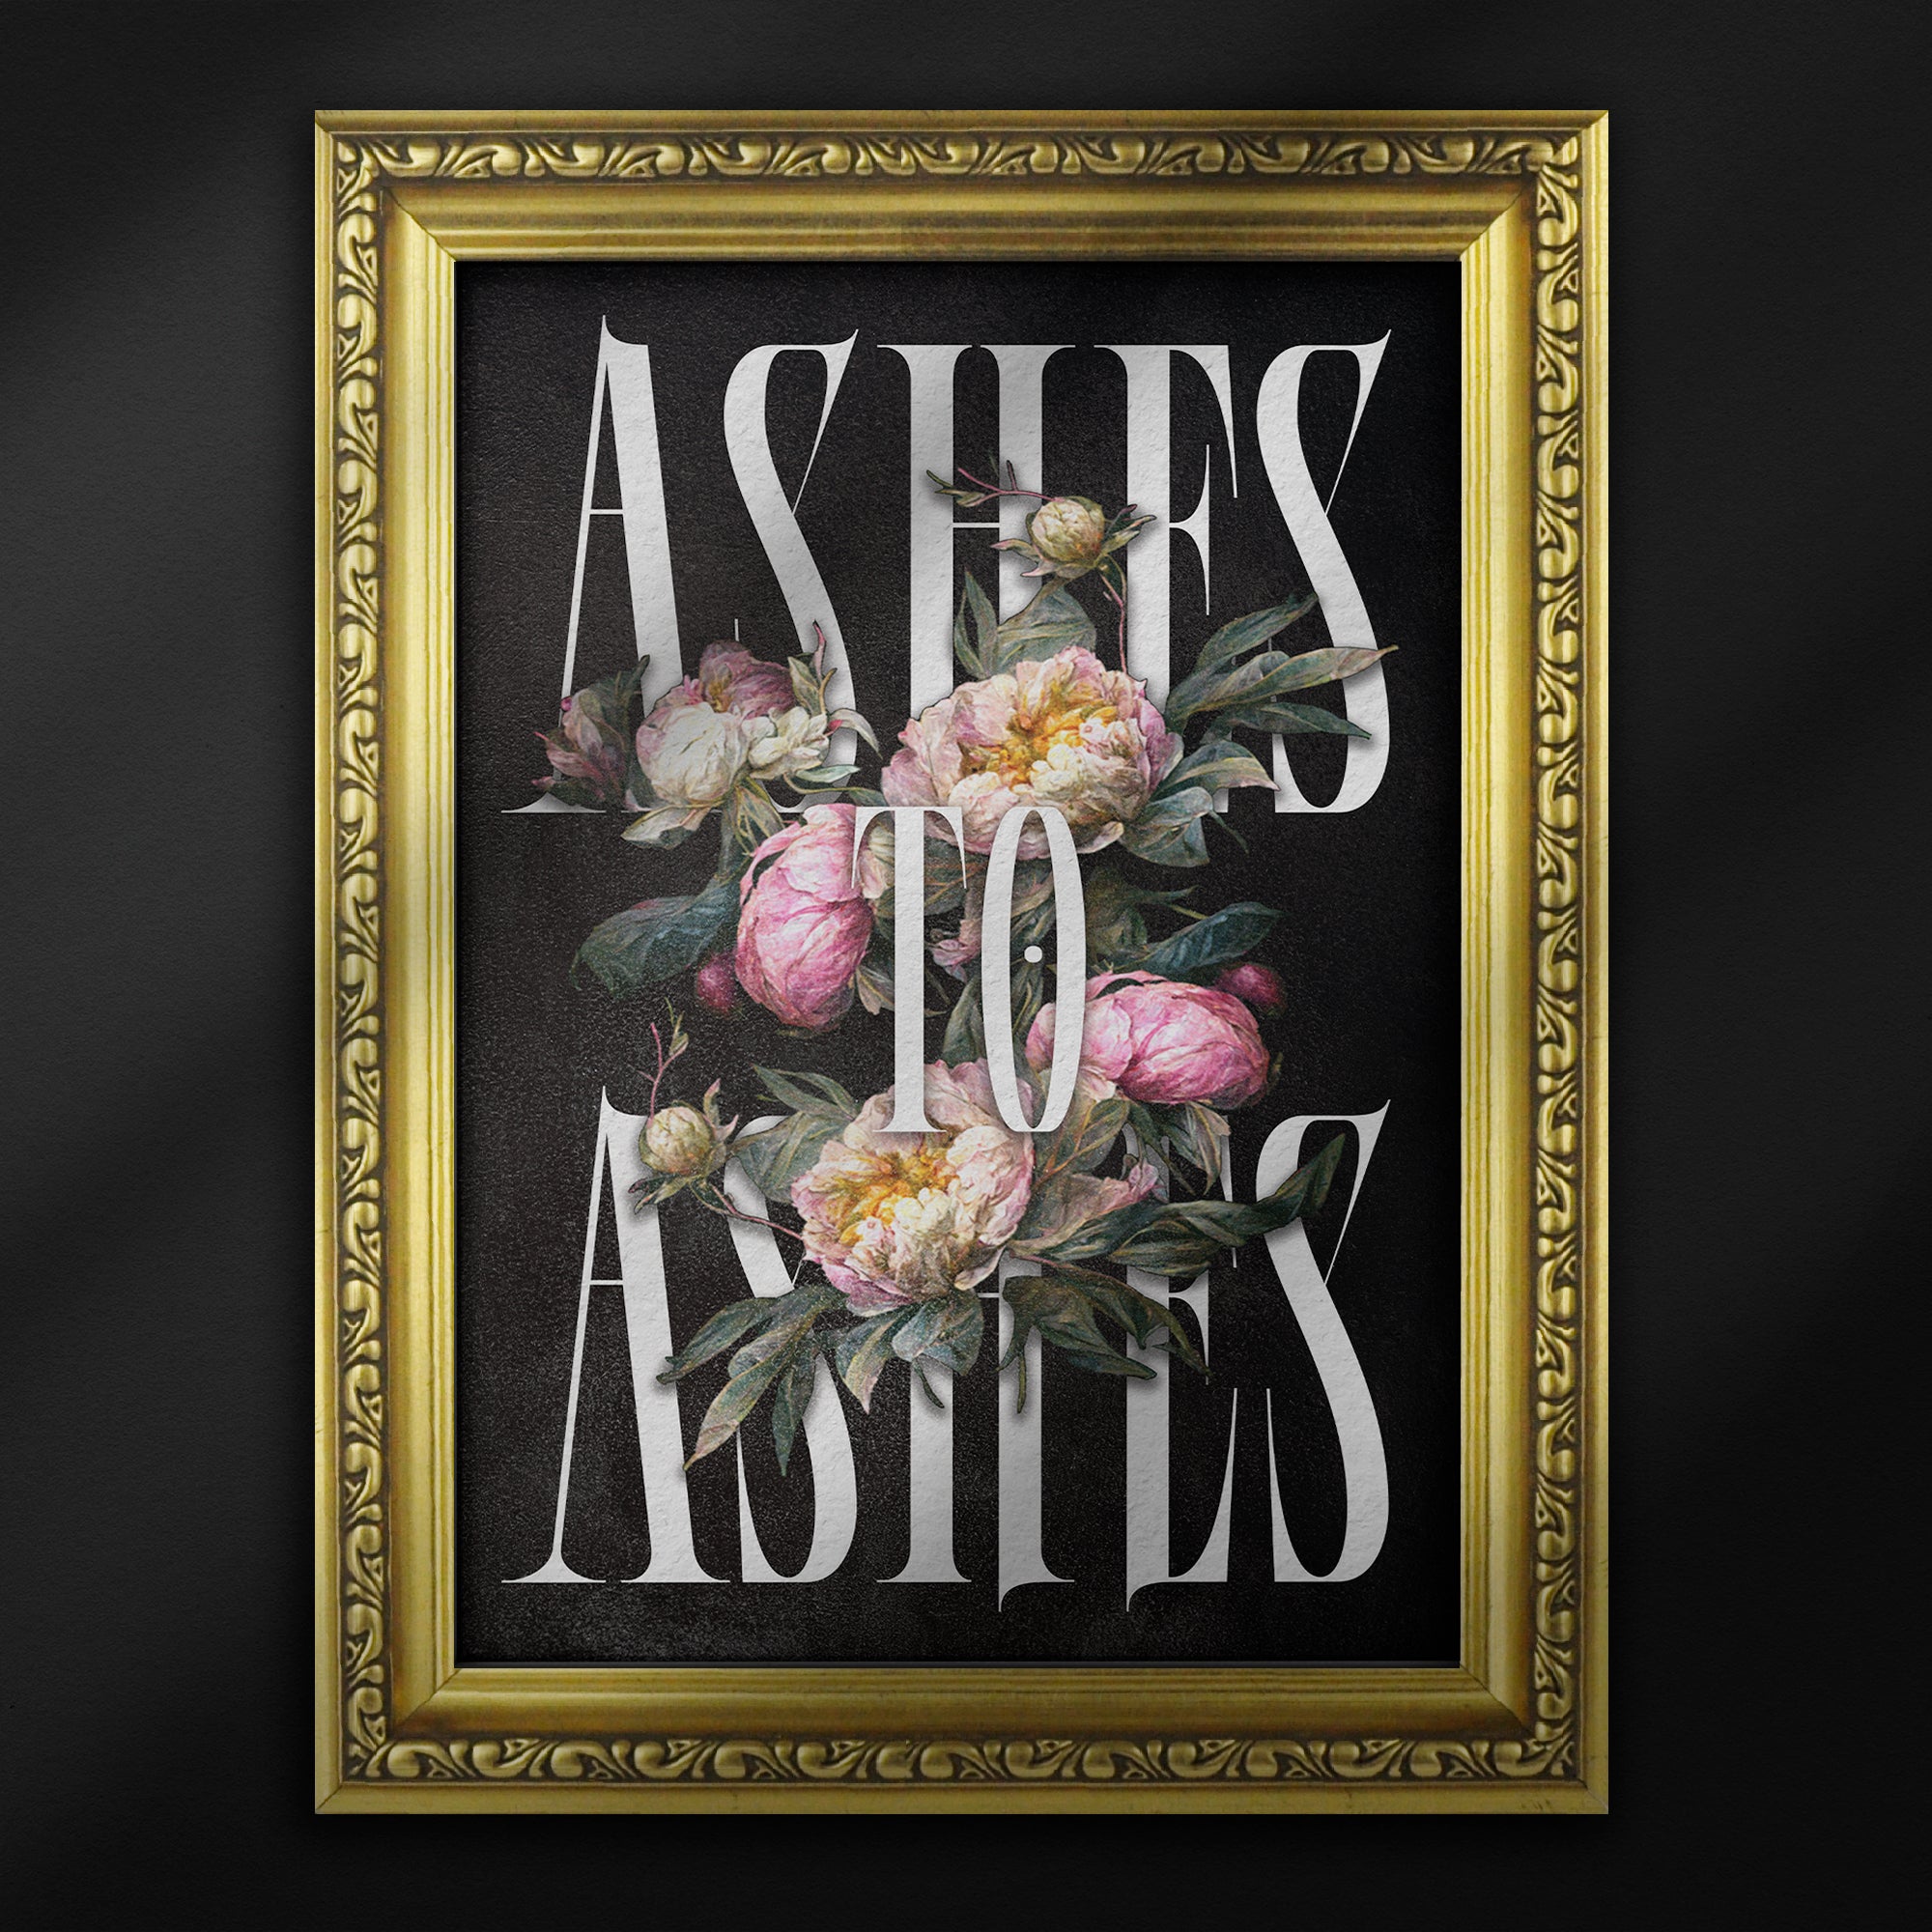 ASHES TO ASHES the end is nigh typography print by the blackened teeth gothic home decor